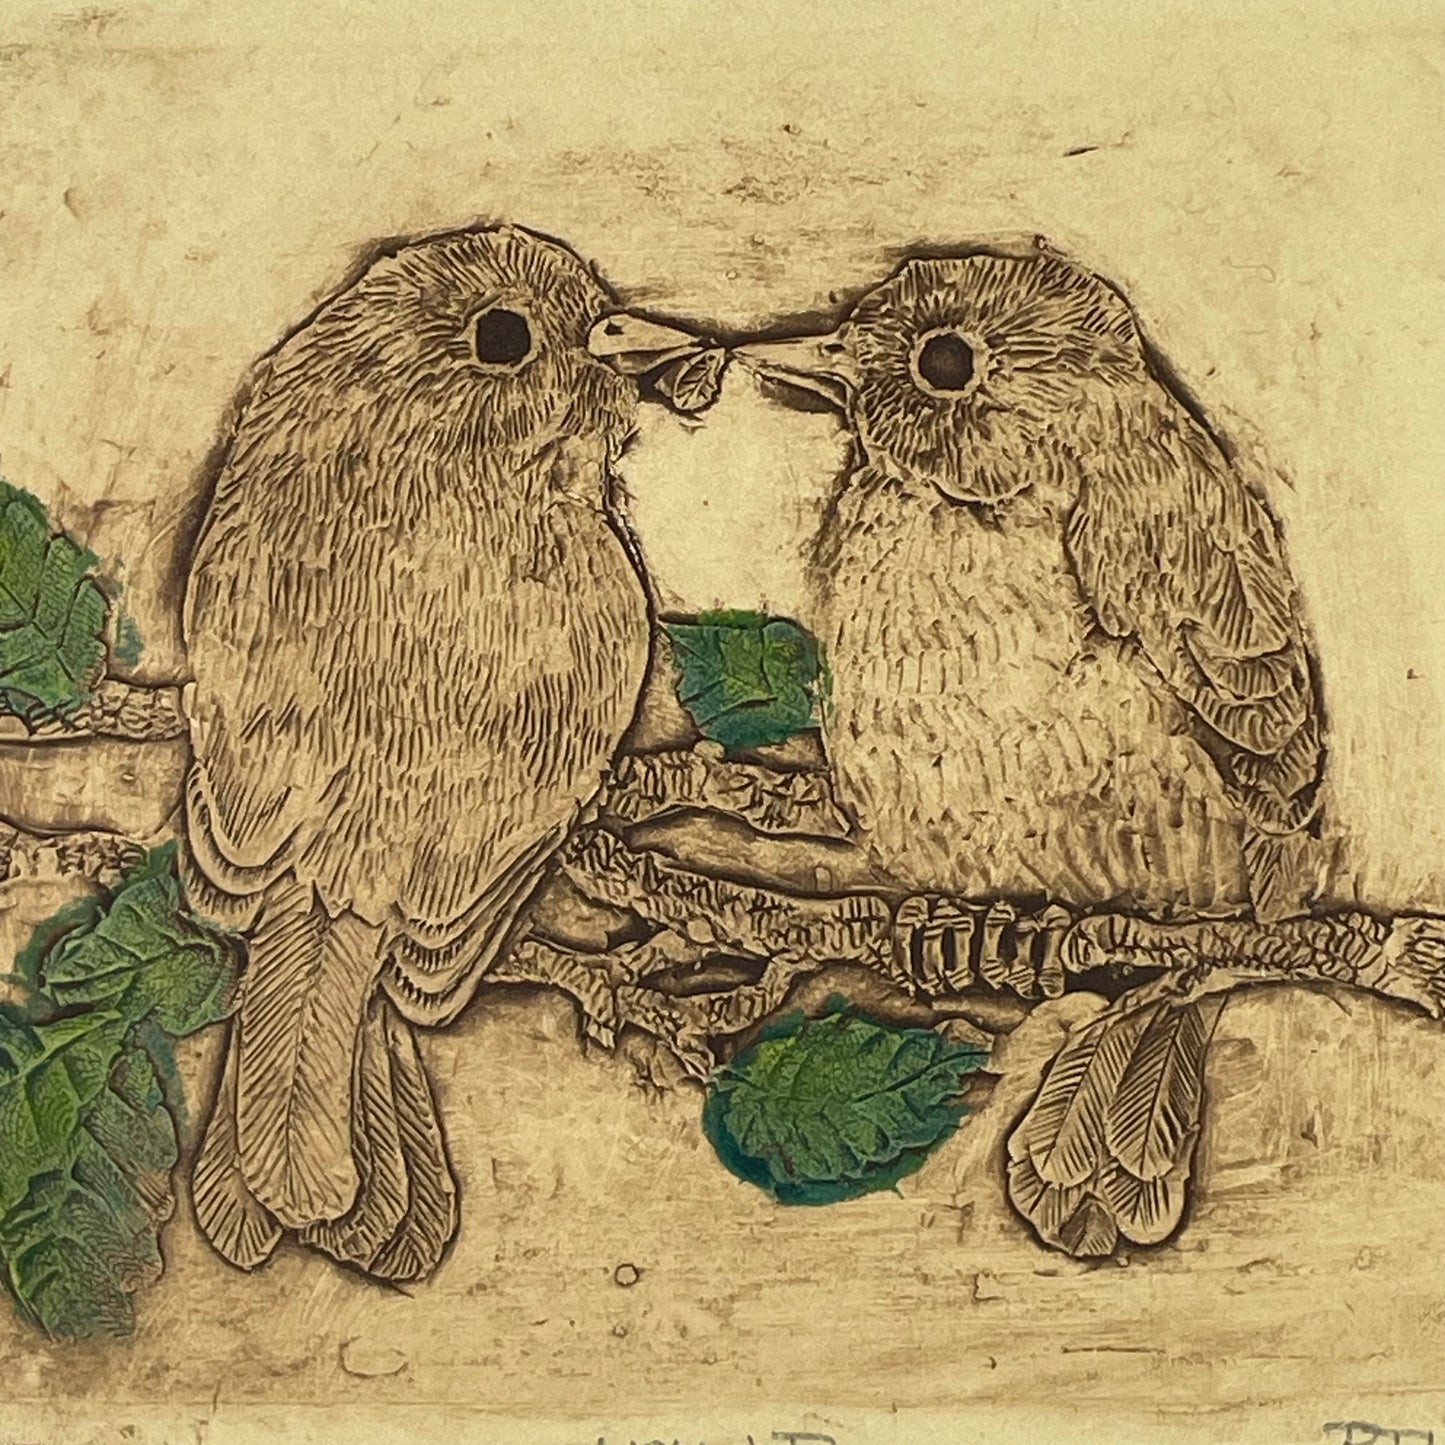 Limited Edition Color Etching Bill and Linda Neely "You & I" Love Birds